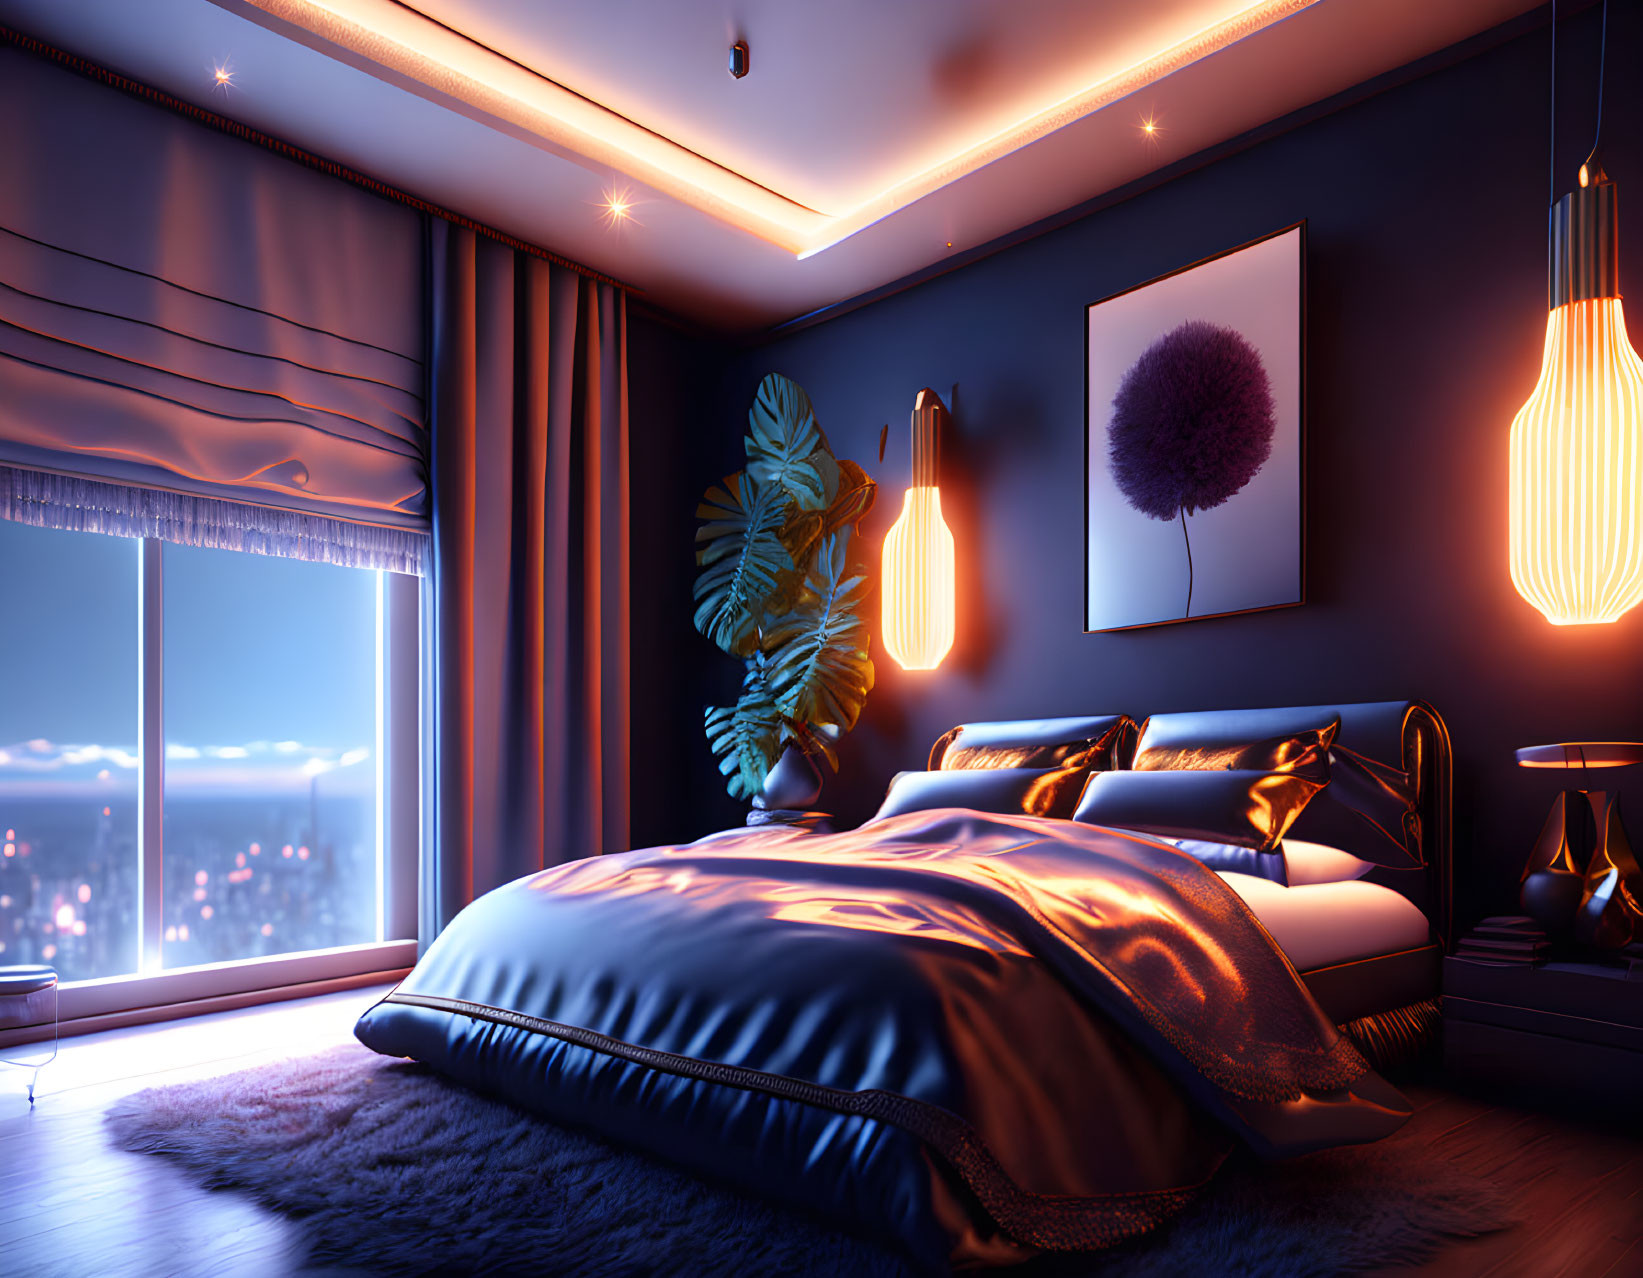 Modern Bedroom at Night with Purple Ambient Lighting and City View